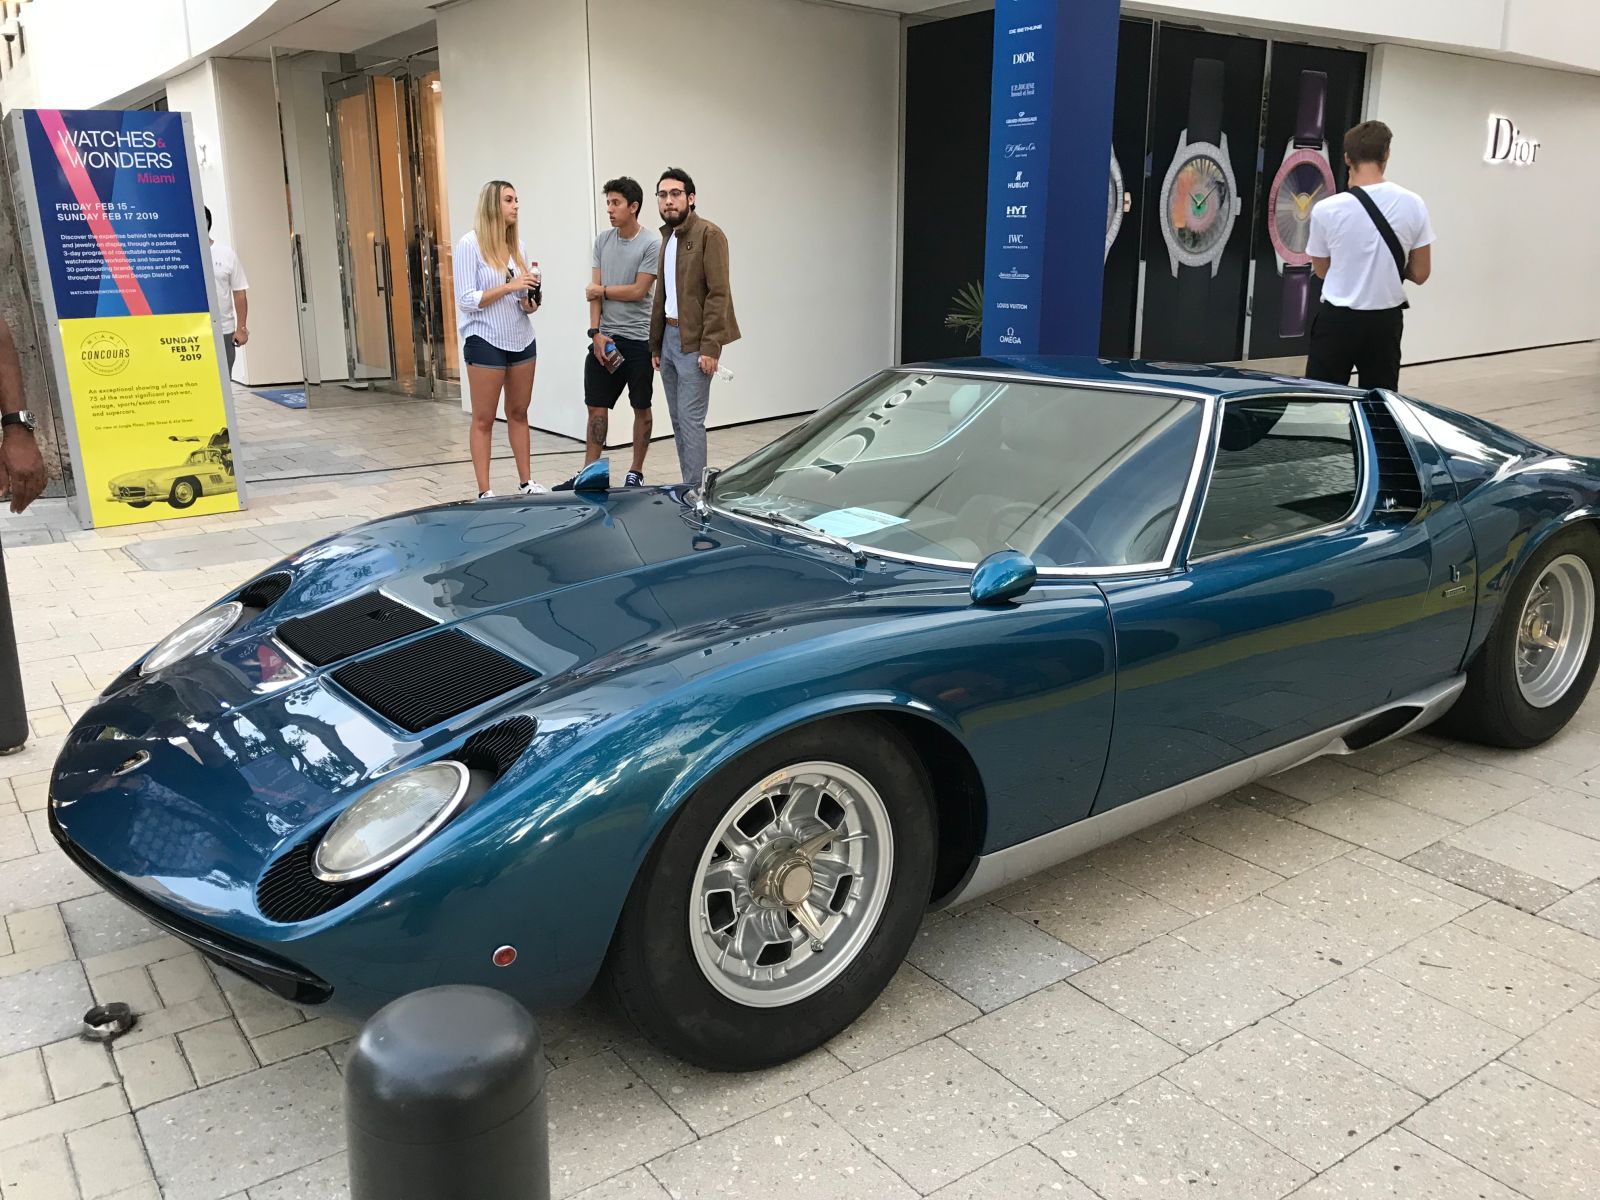 The impossibly beautiful (in that color!) and impossibly low Miura